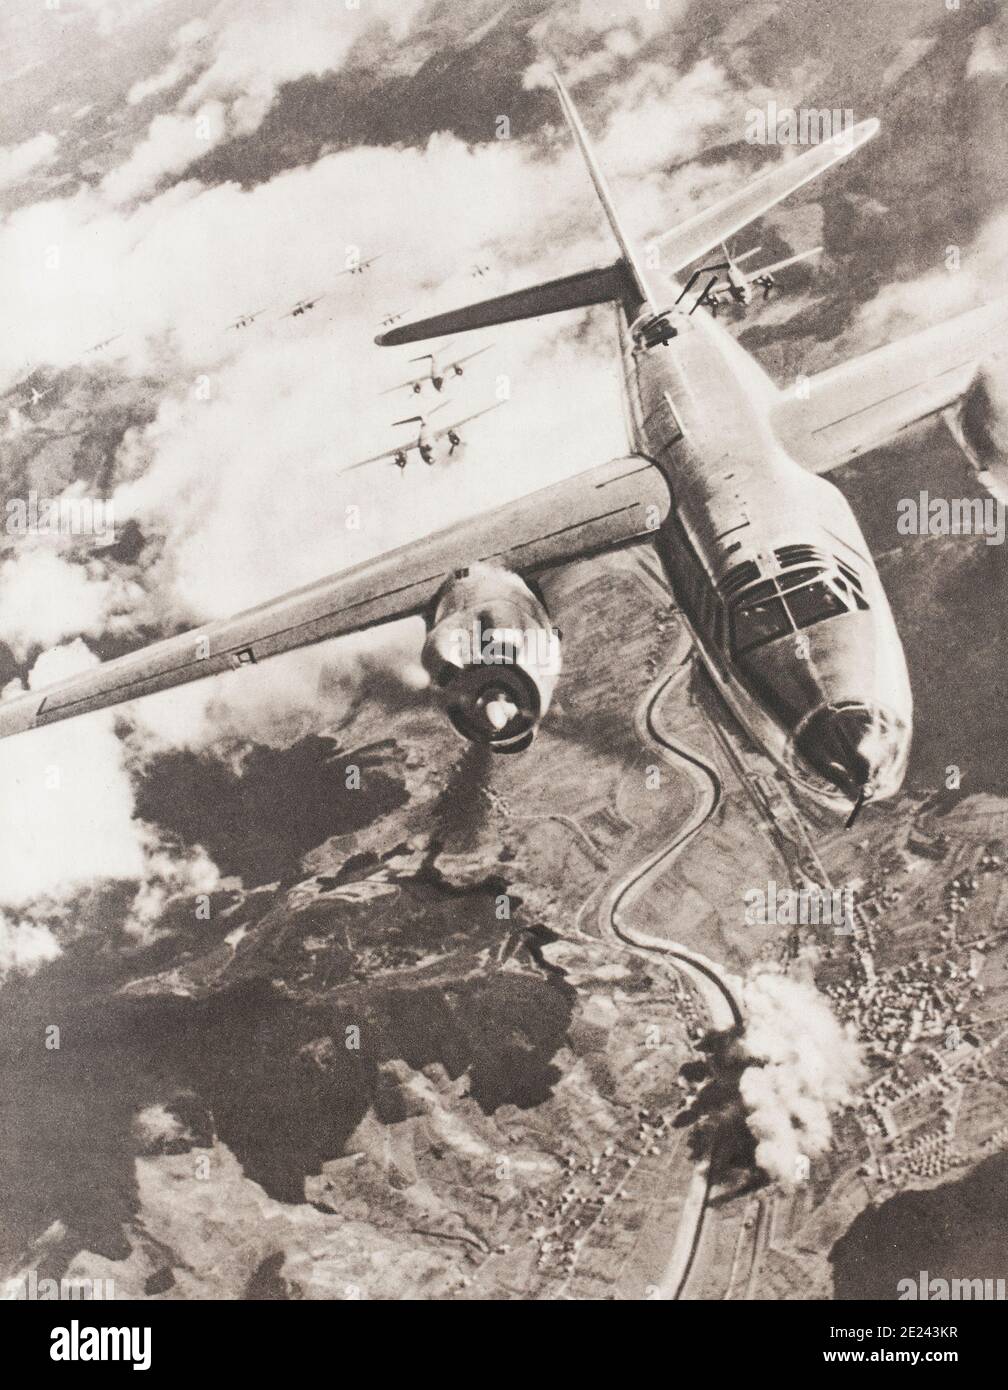 A group of 'B-26 Marauders' (an American twin-engined medium bomber) belonging to the Tactical Air Force attacked an important railway junction in Has Stock Photo